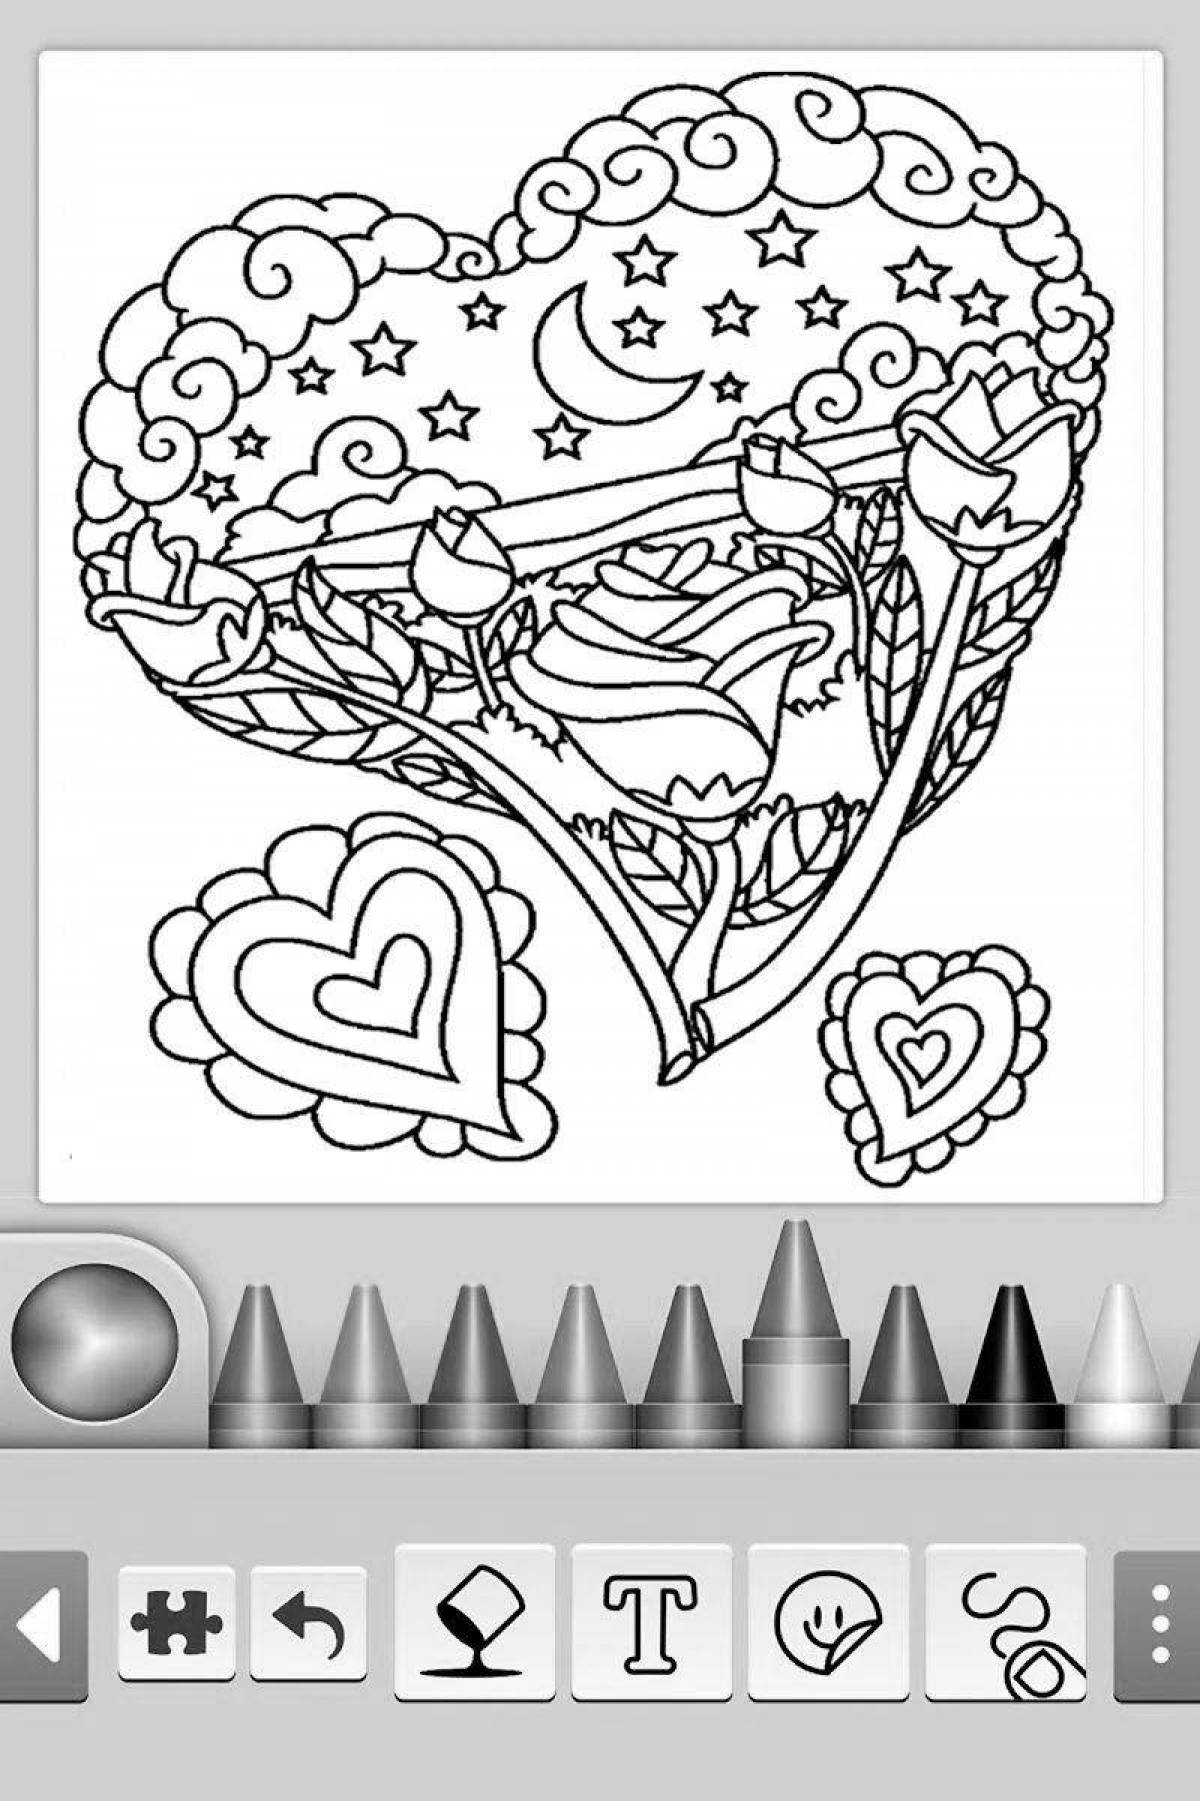 Adorable coloring game